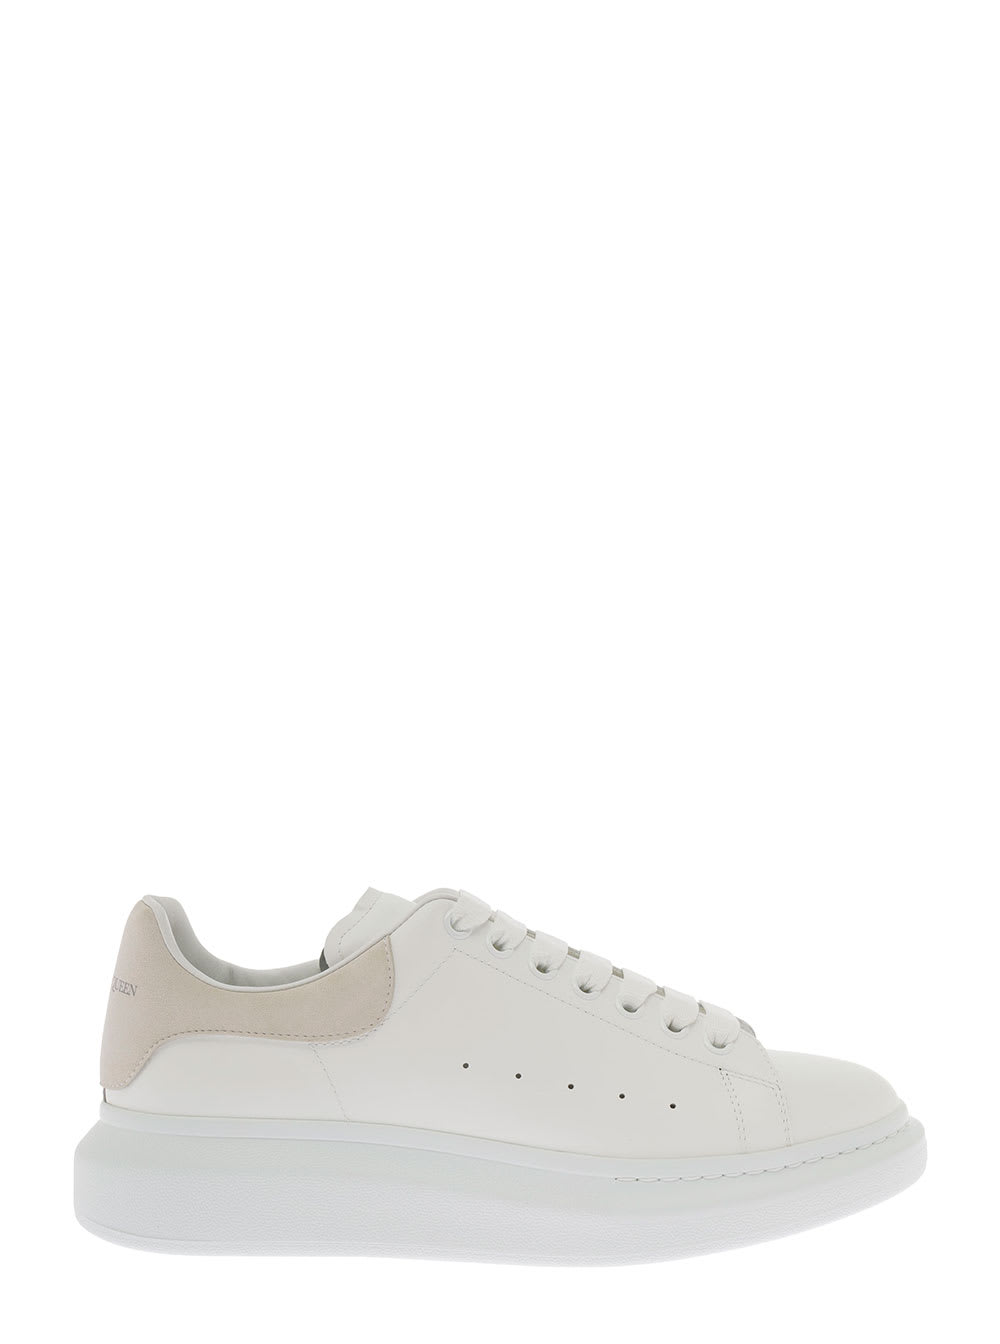 Alexander McQueen Big Sole White Leather Sneakers